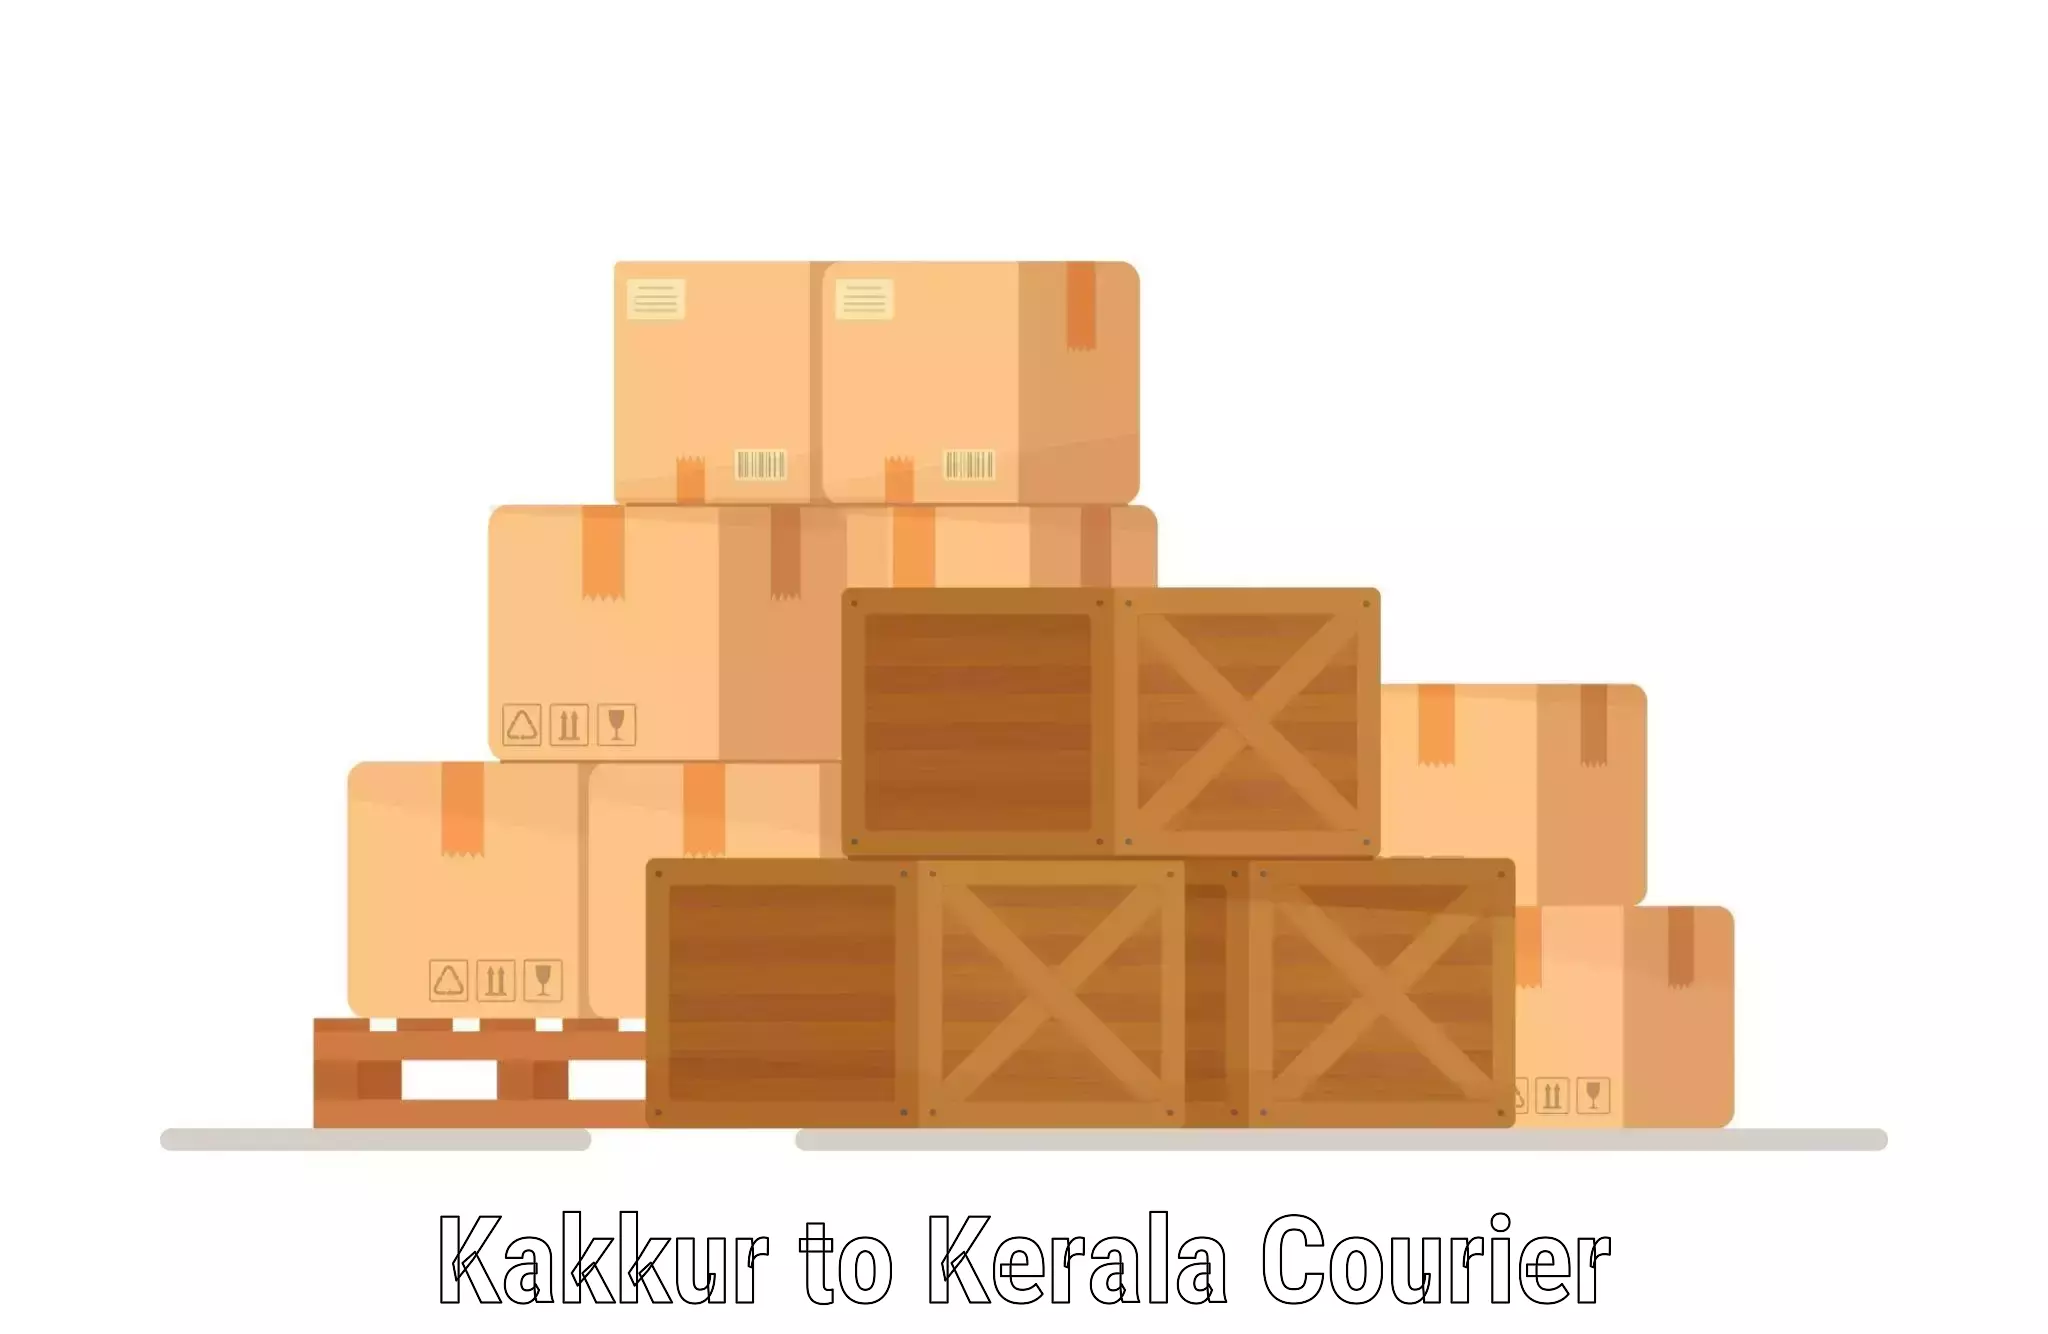 Next-day delivery options in Kakkur to Manthuka